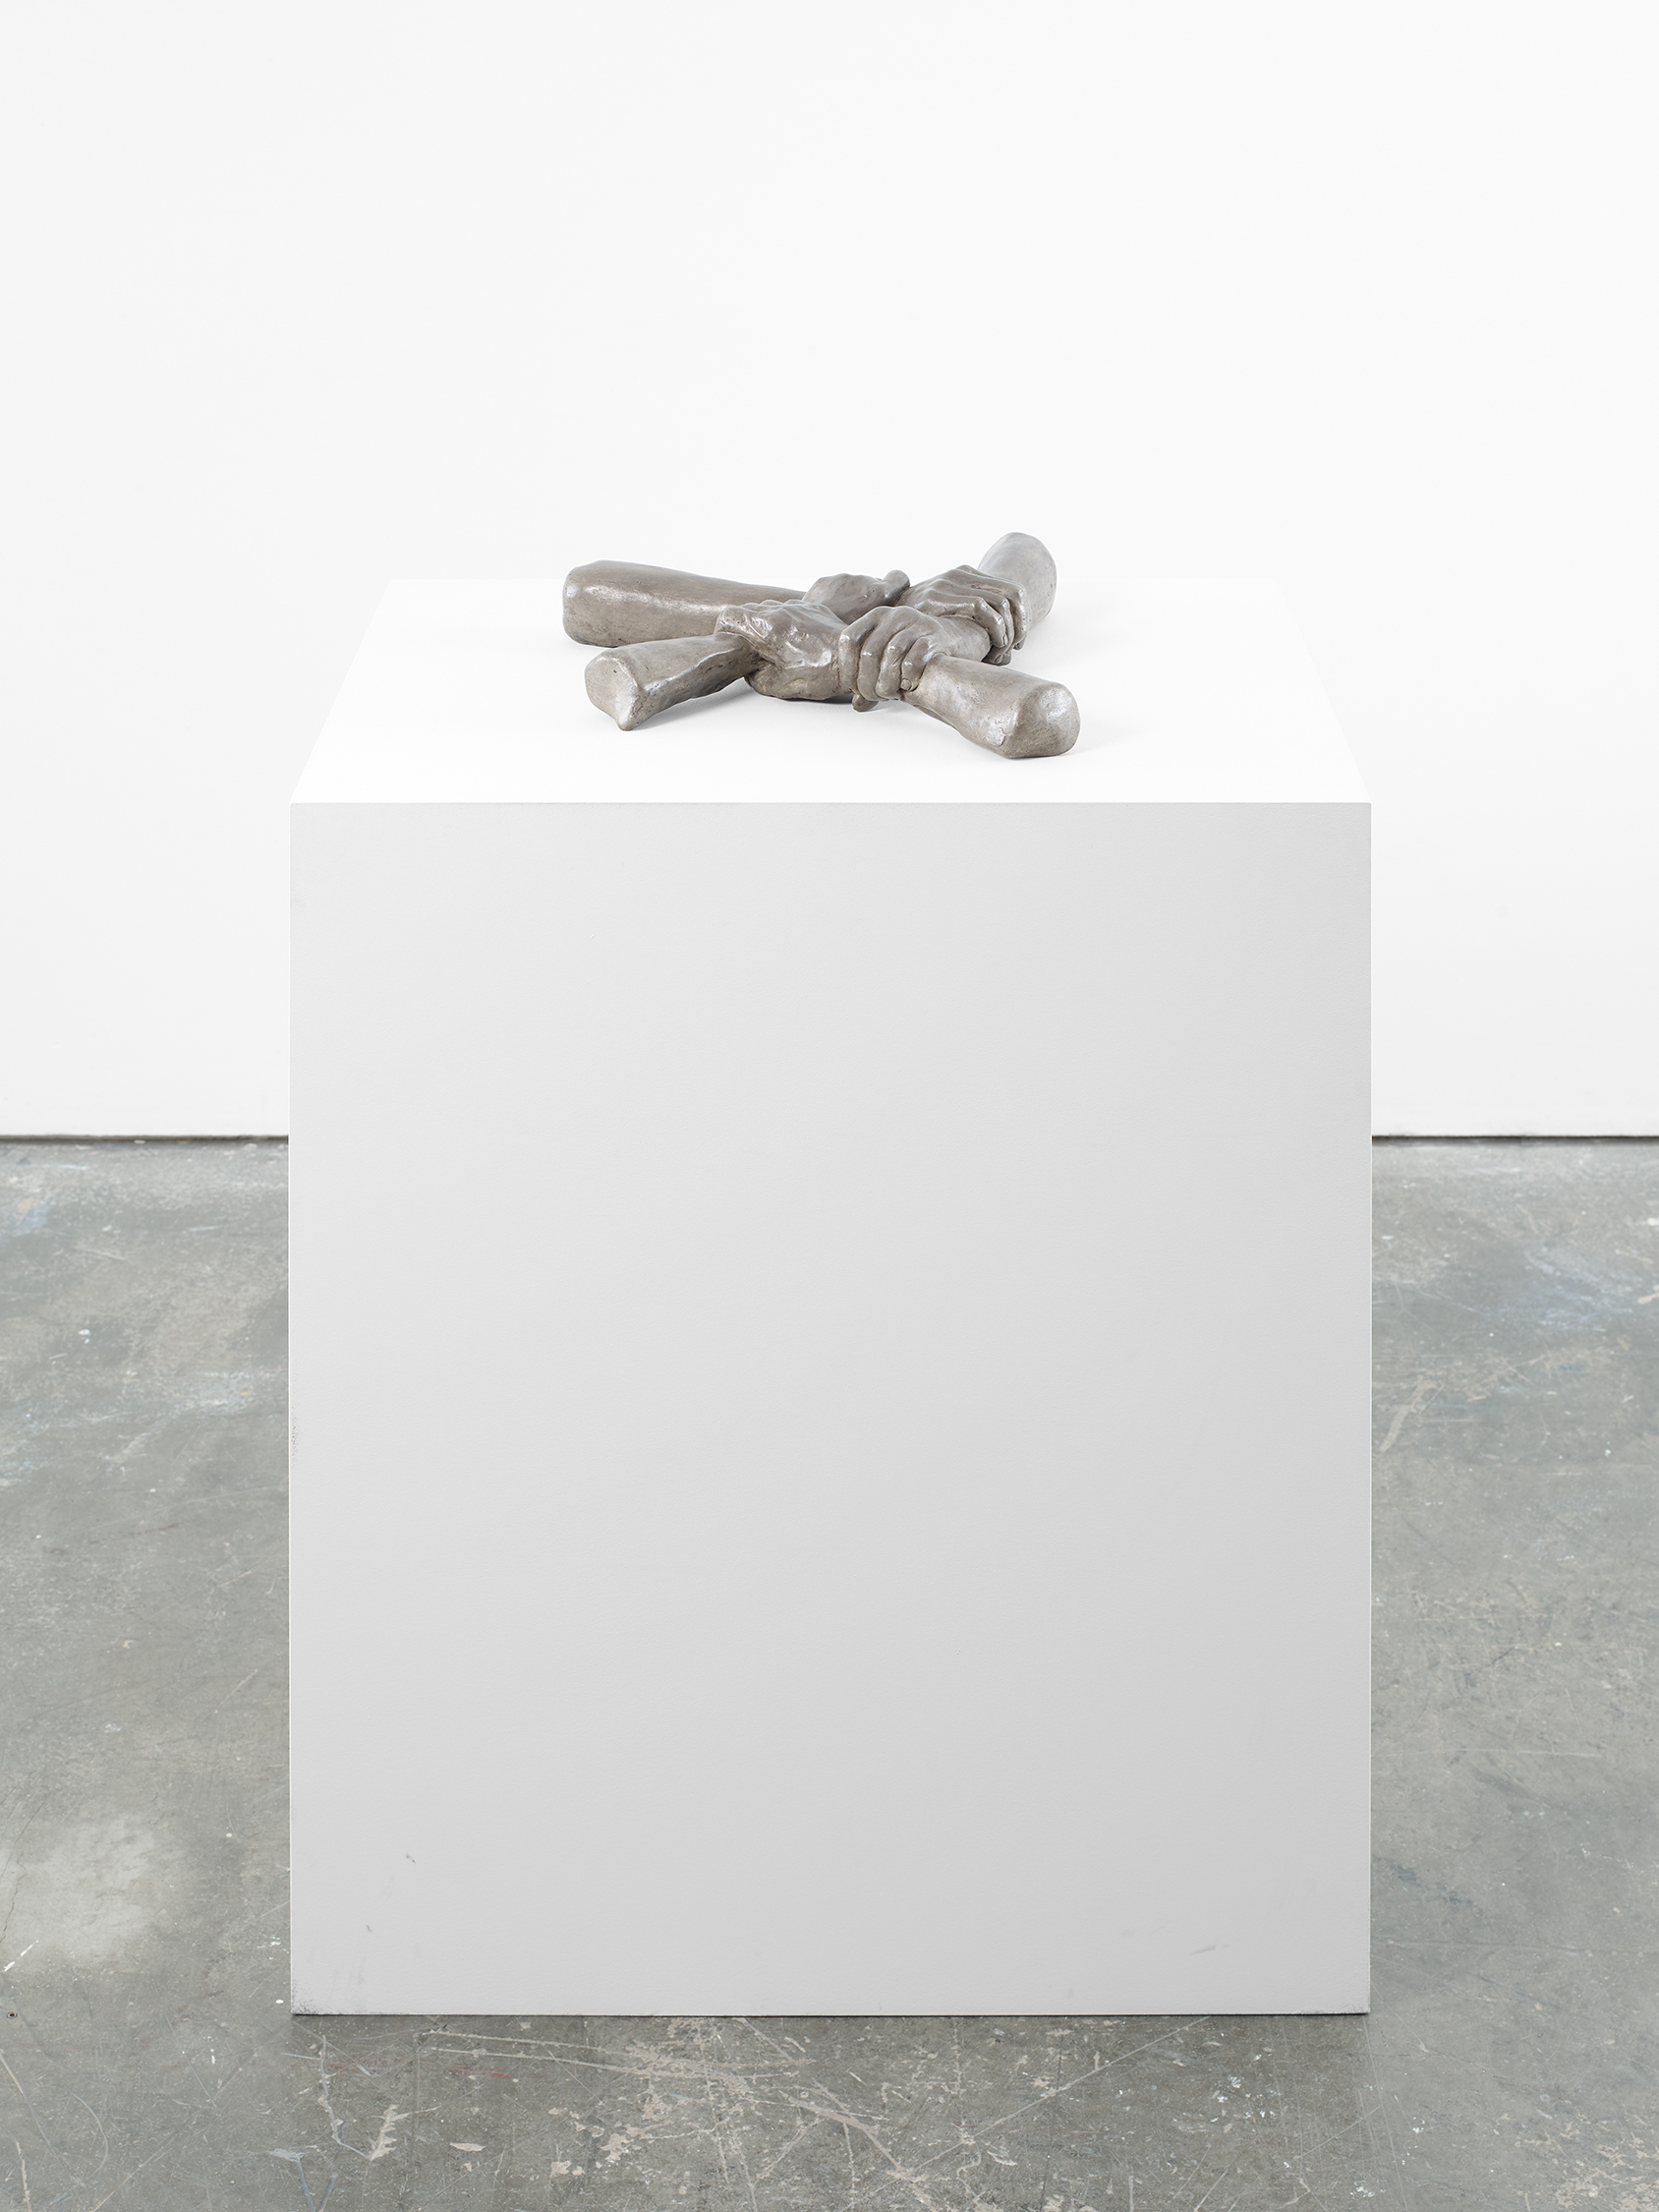 Installation view of Louise Bourgeois's scultpure Untitled No 6